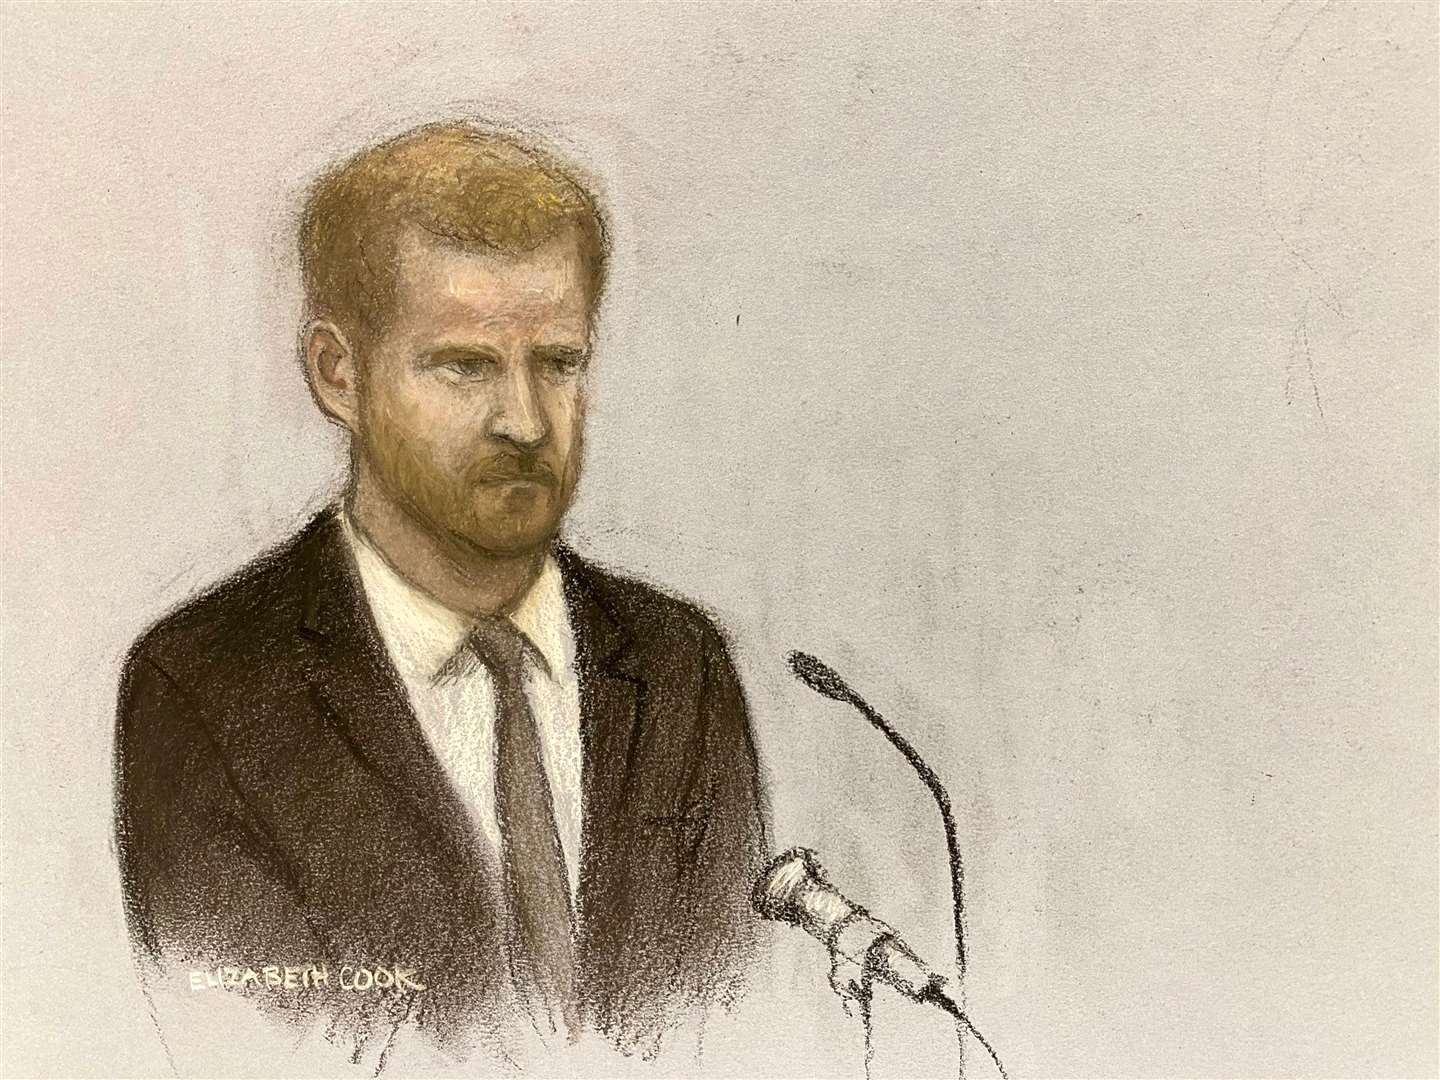 The Duke of Sussex giving evidence during the phone hacking trial against Mirror Group Newspapers (Elizabeth Cook/PA)